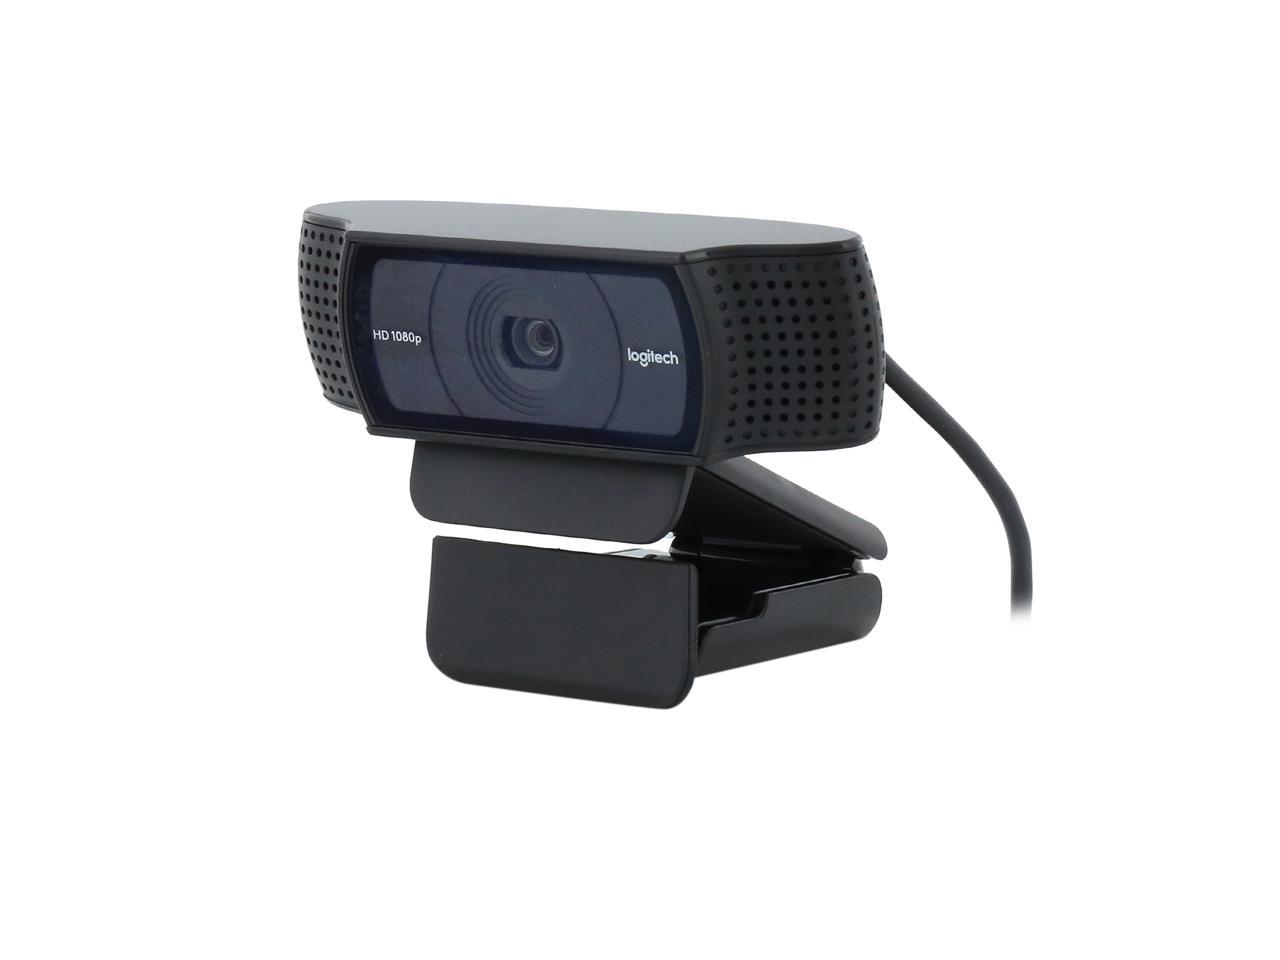 logitech motion detection software for chrome and mac